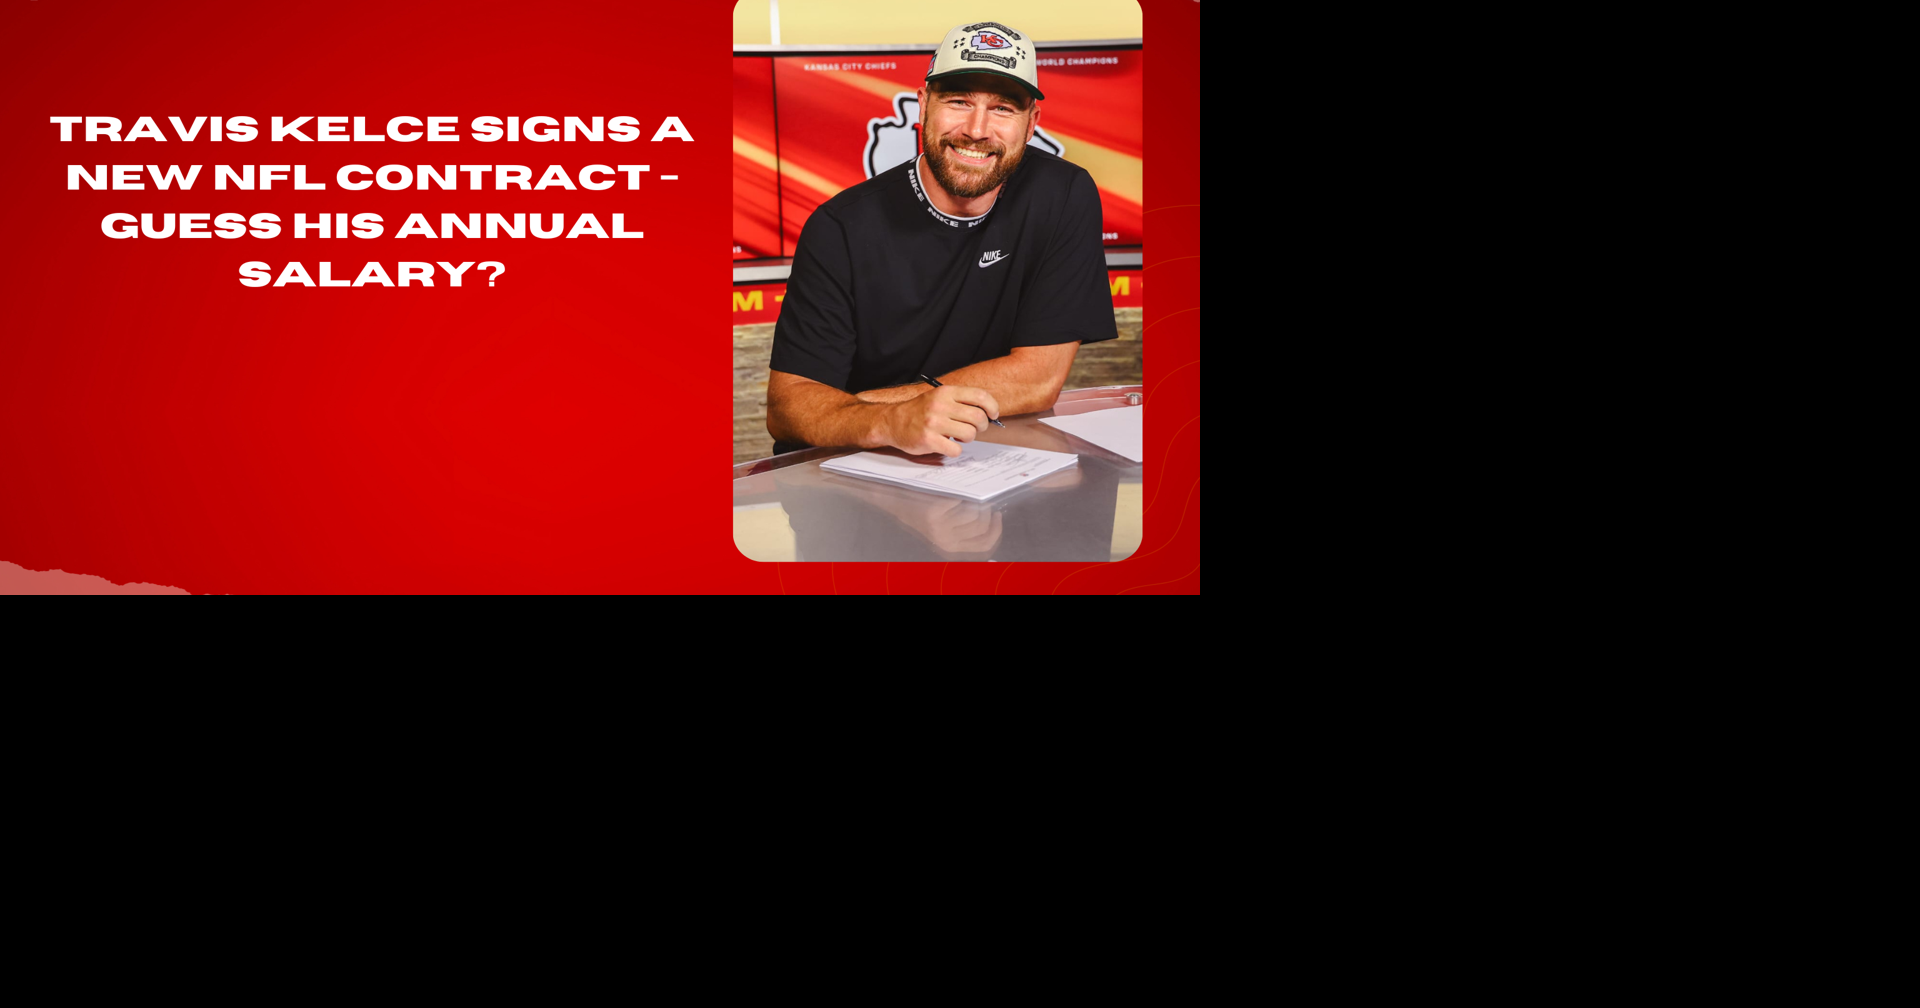 Travis Kelce signs a new NFL contract Guess his annual salary